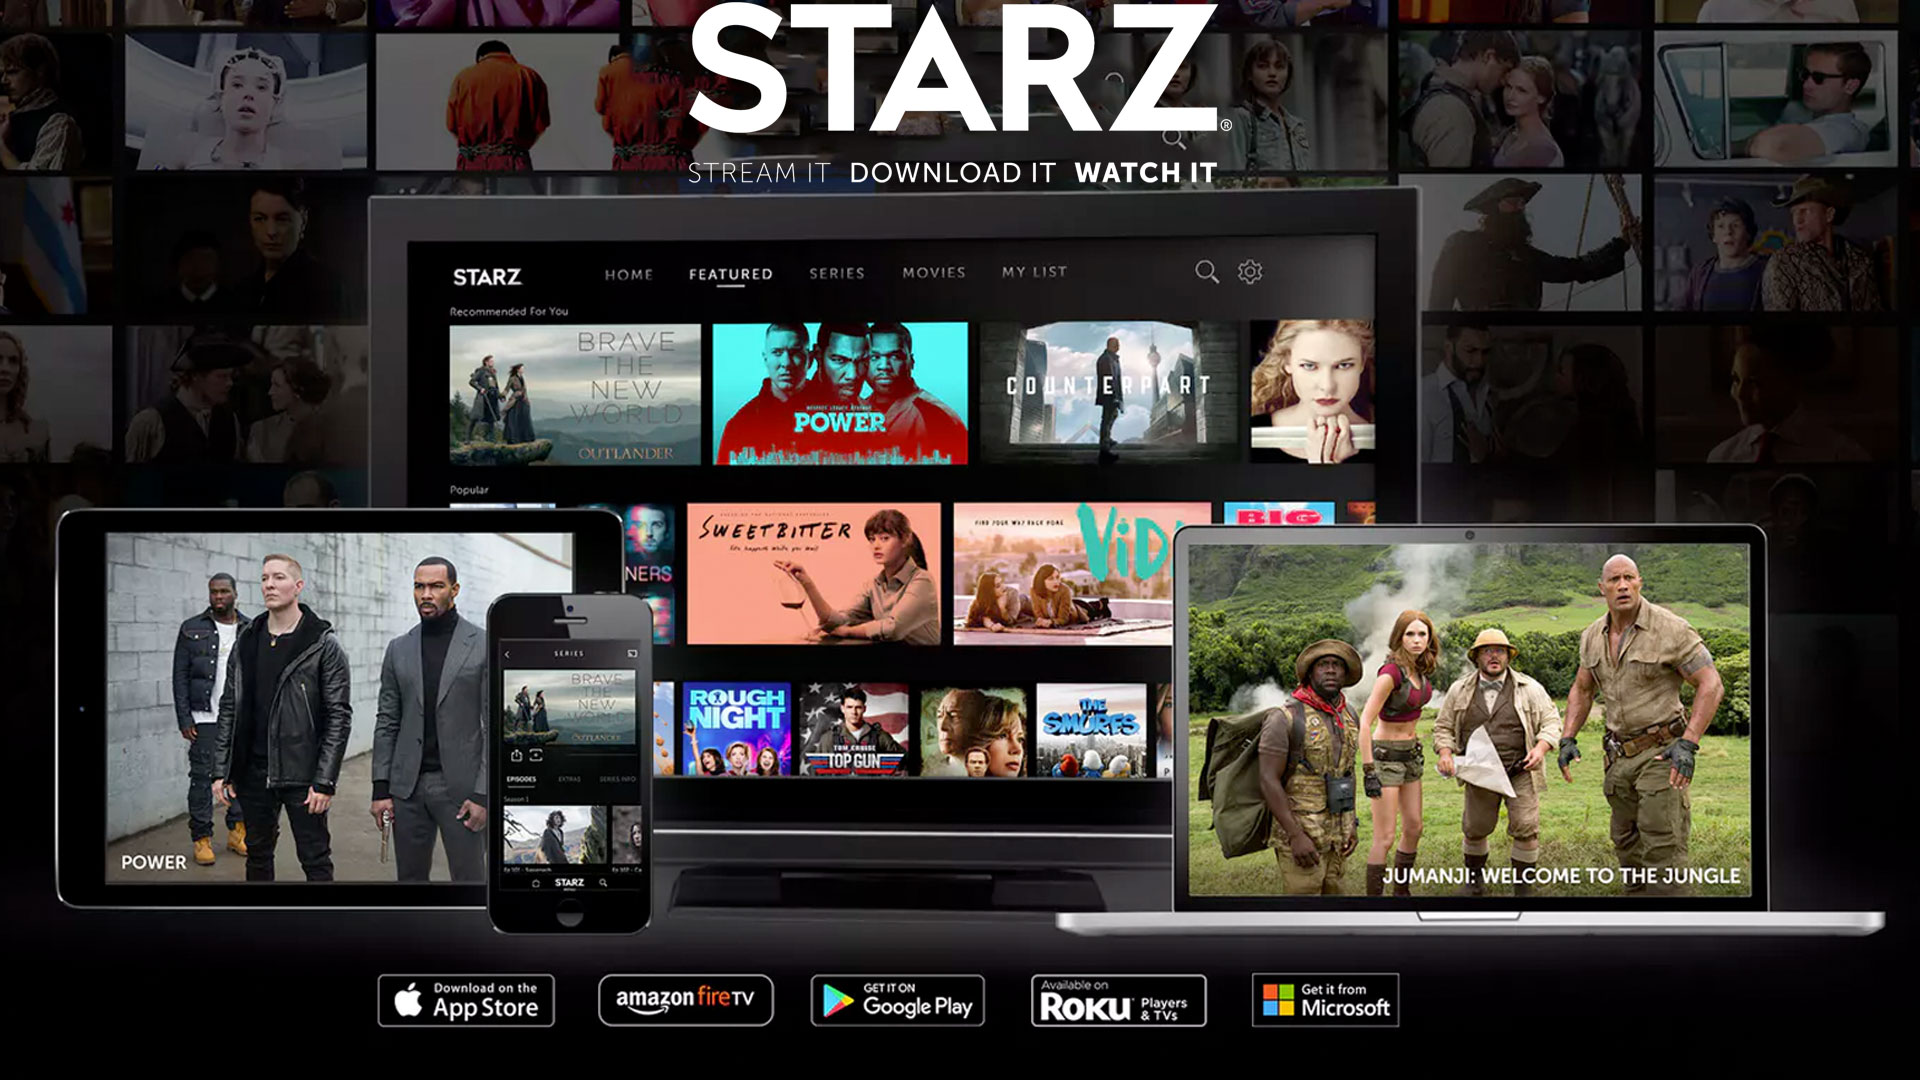 Enjoy three months of Starz streaming for just 5 per month (Reg. 9